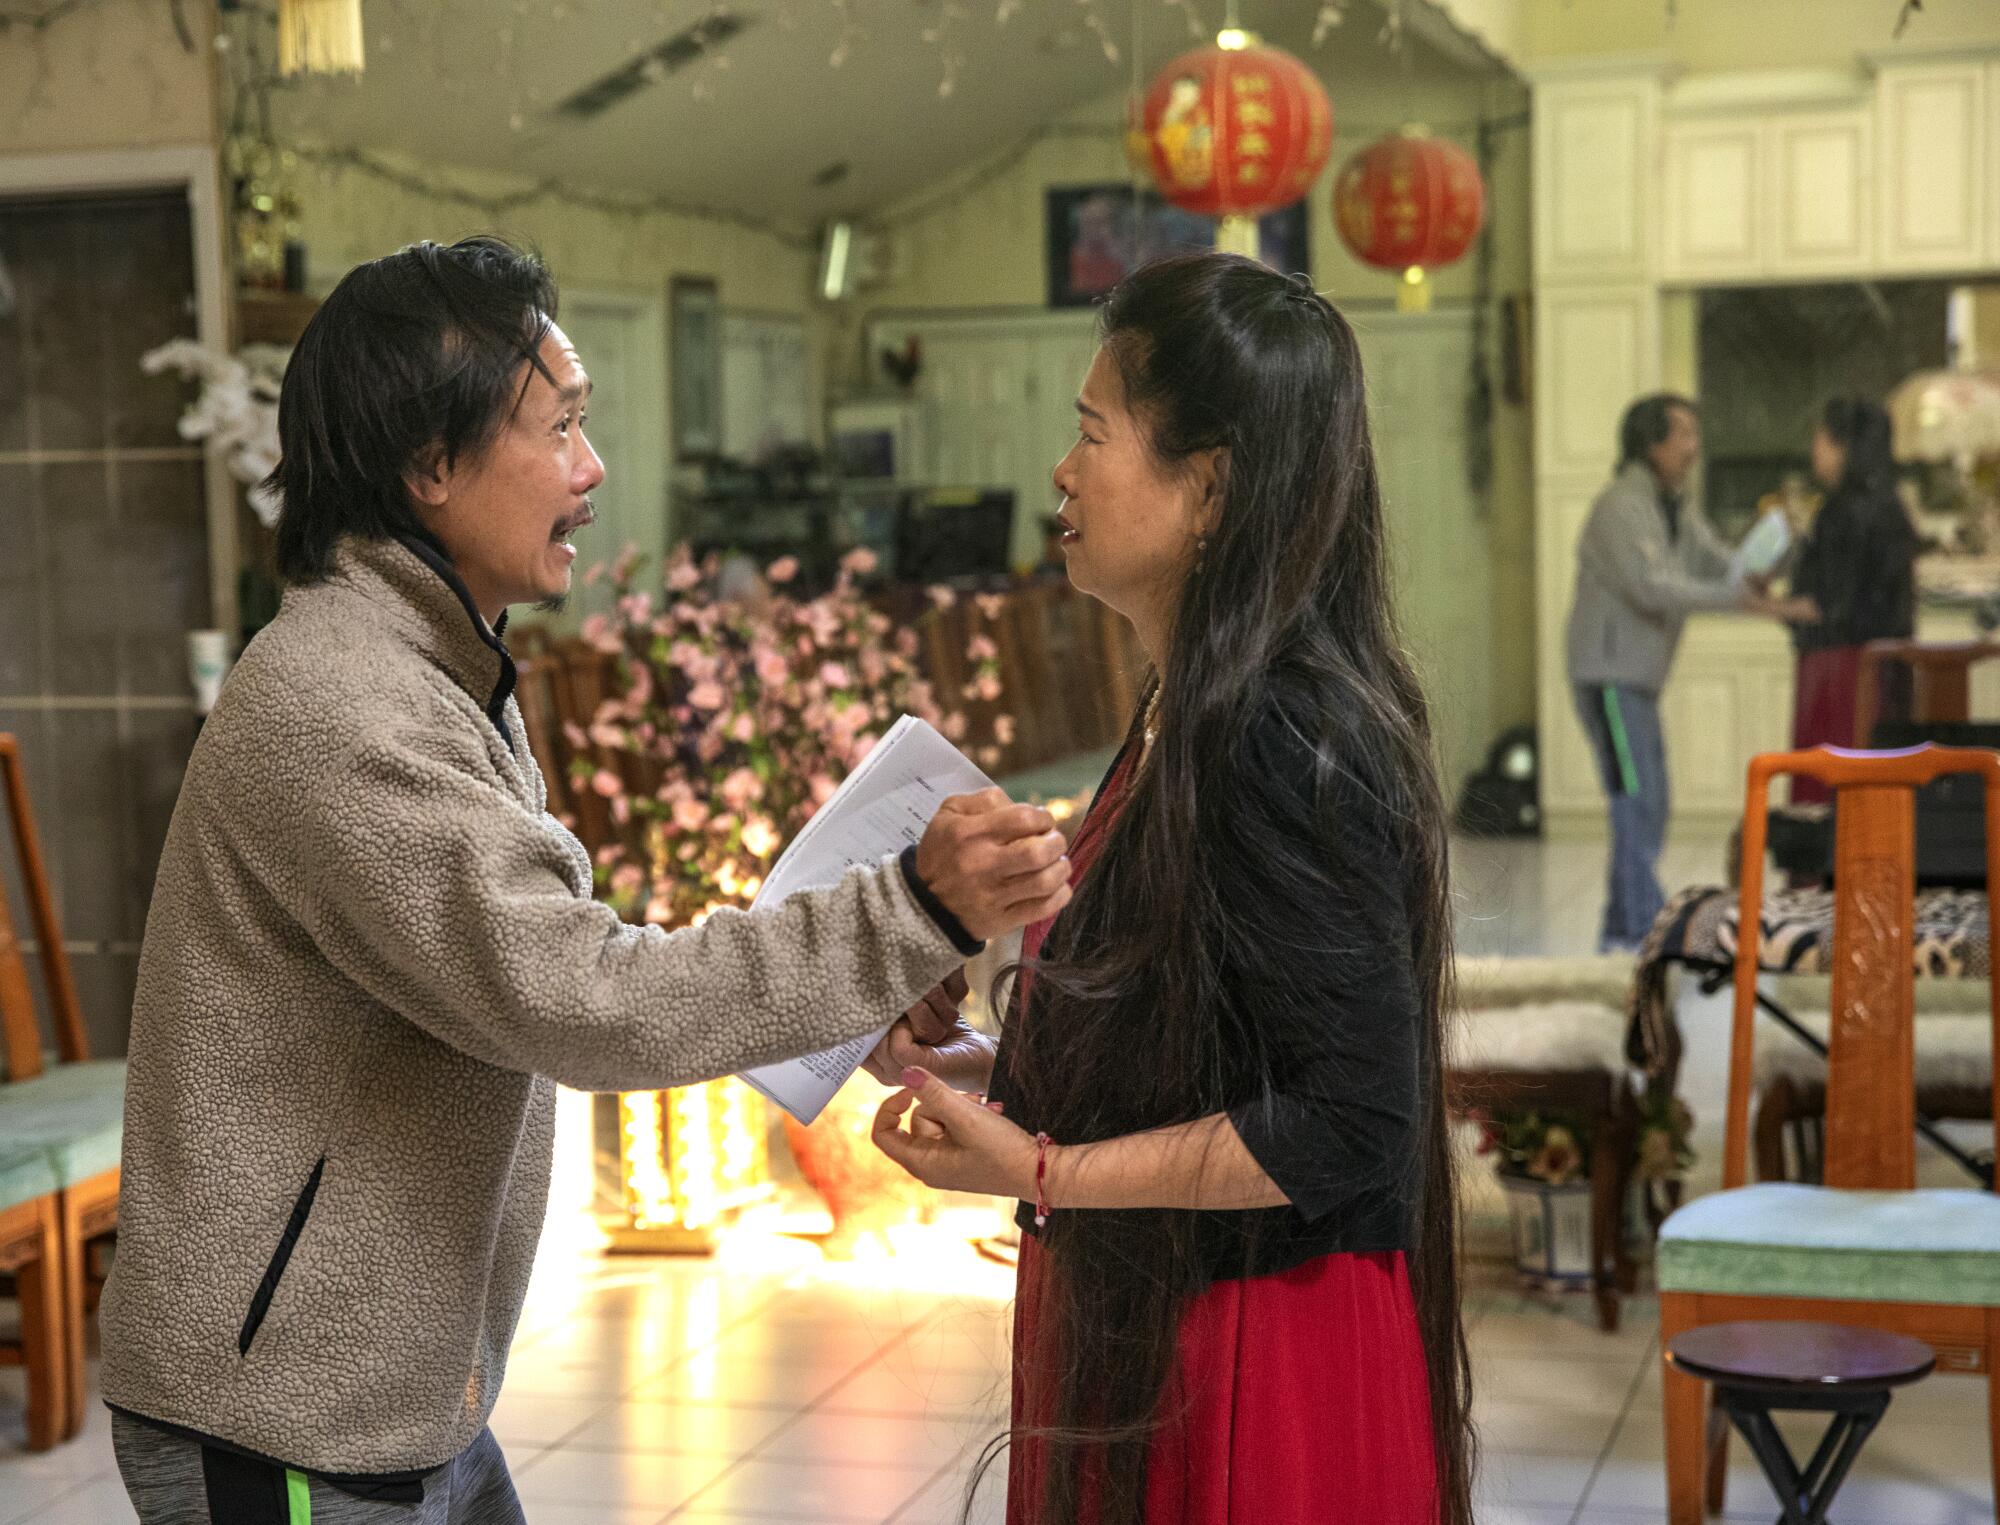 Two people rehearse a scene